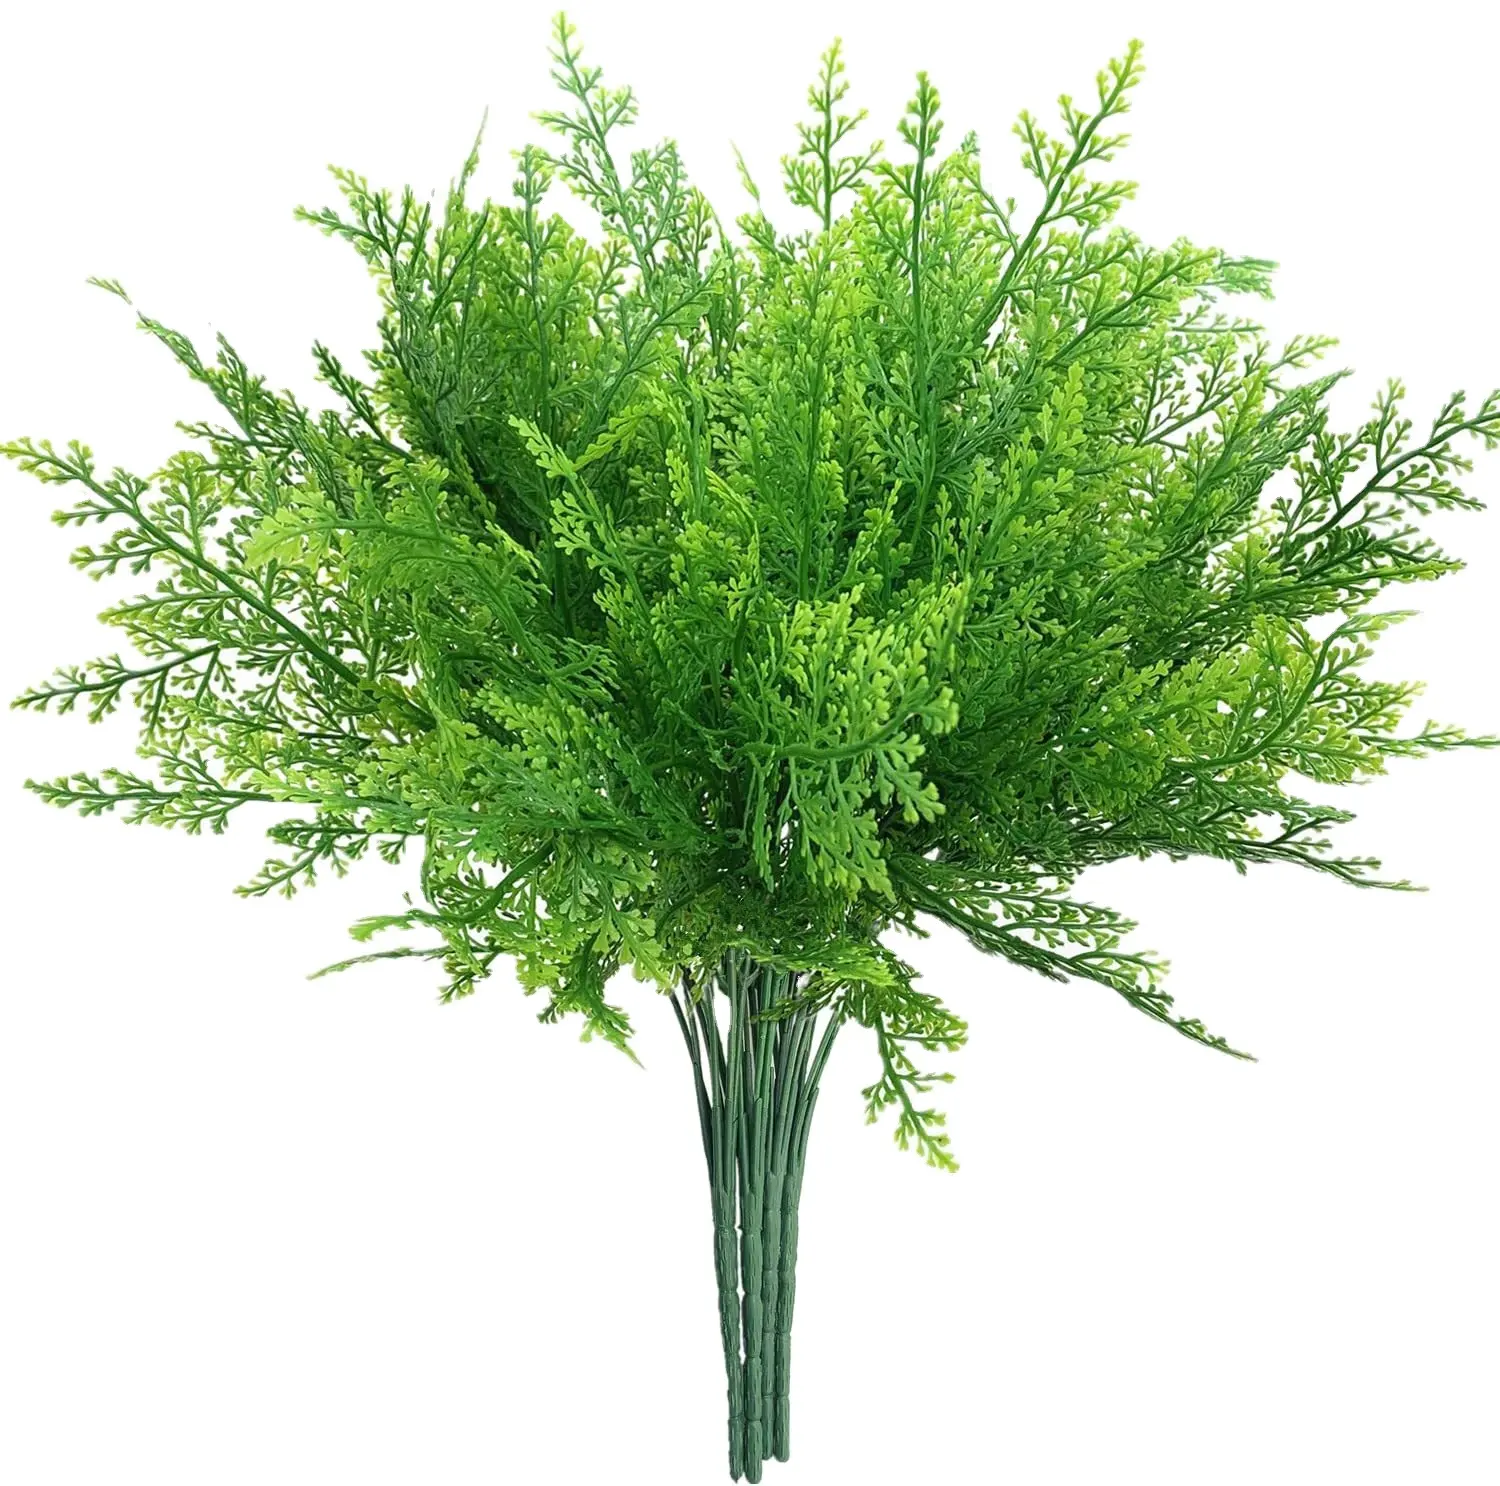 Artificial 7 fork Maidenwort water grass plastic plant wall material simulation of pine grass green plant fern